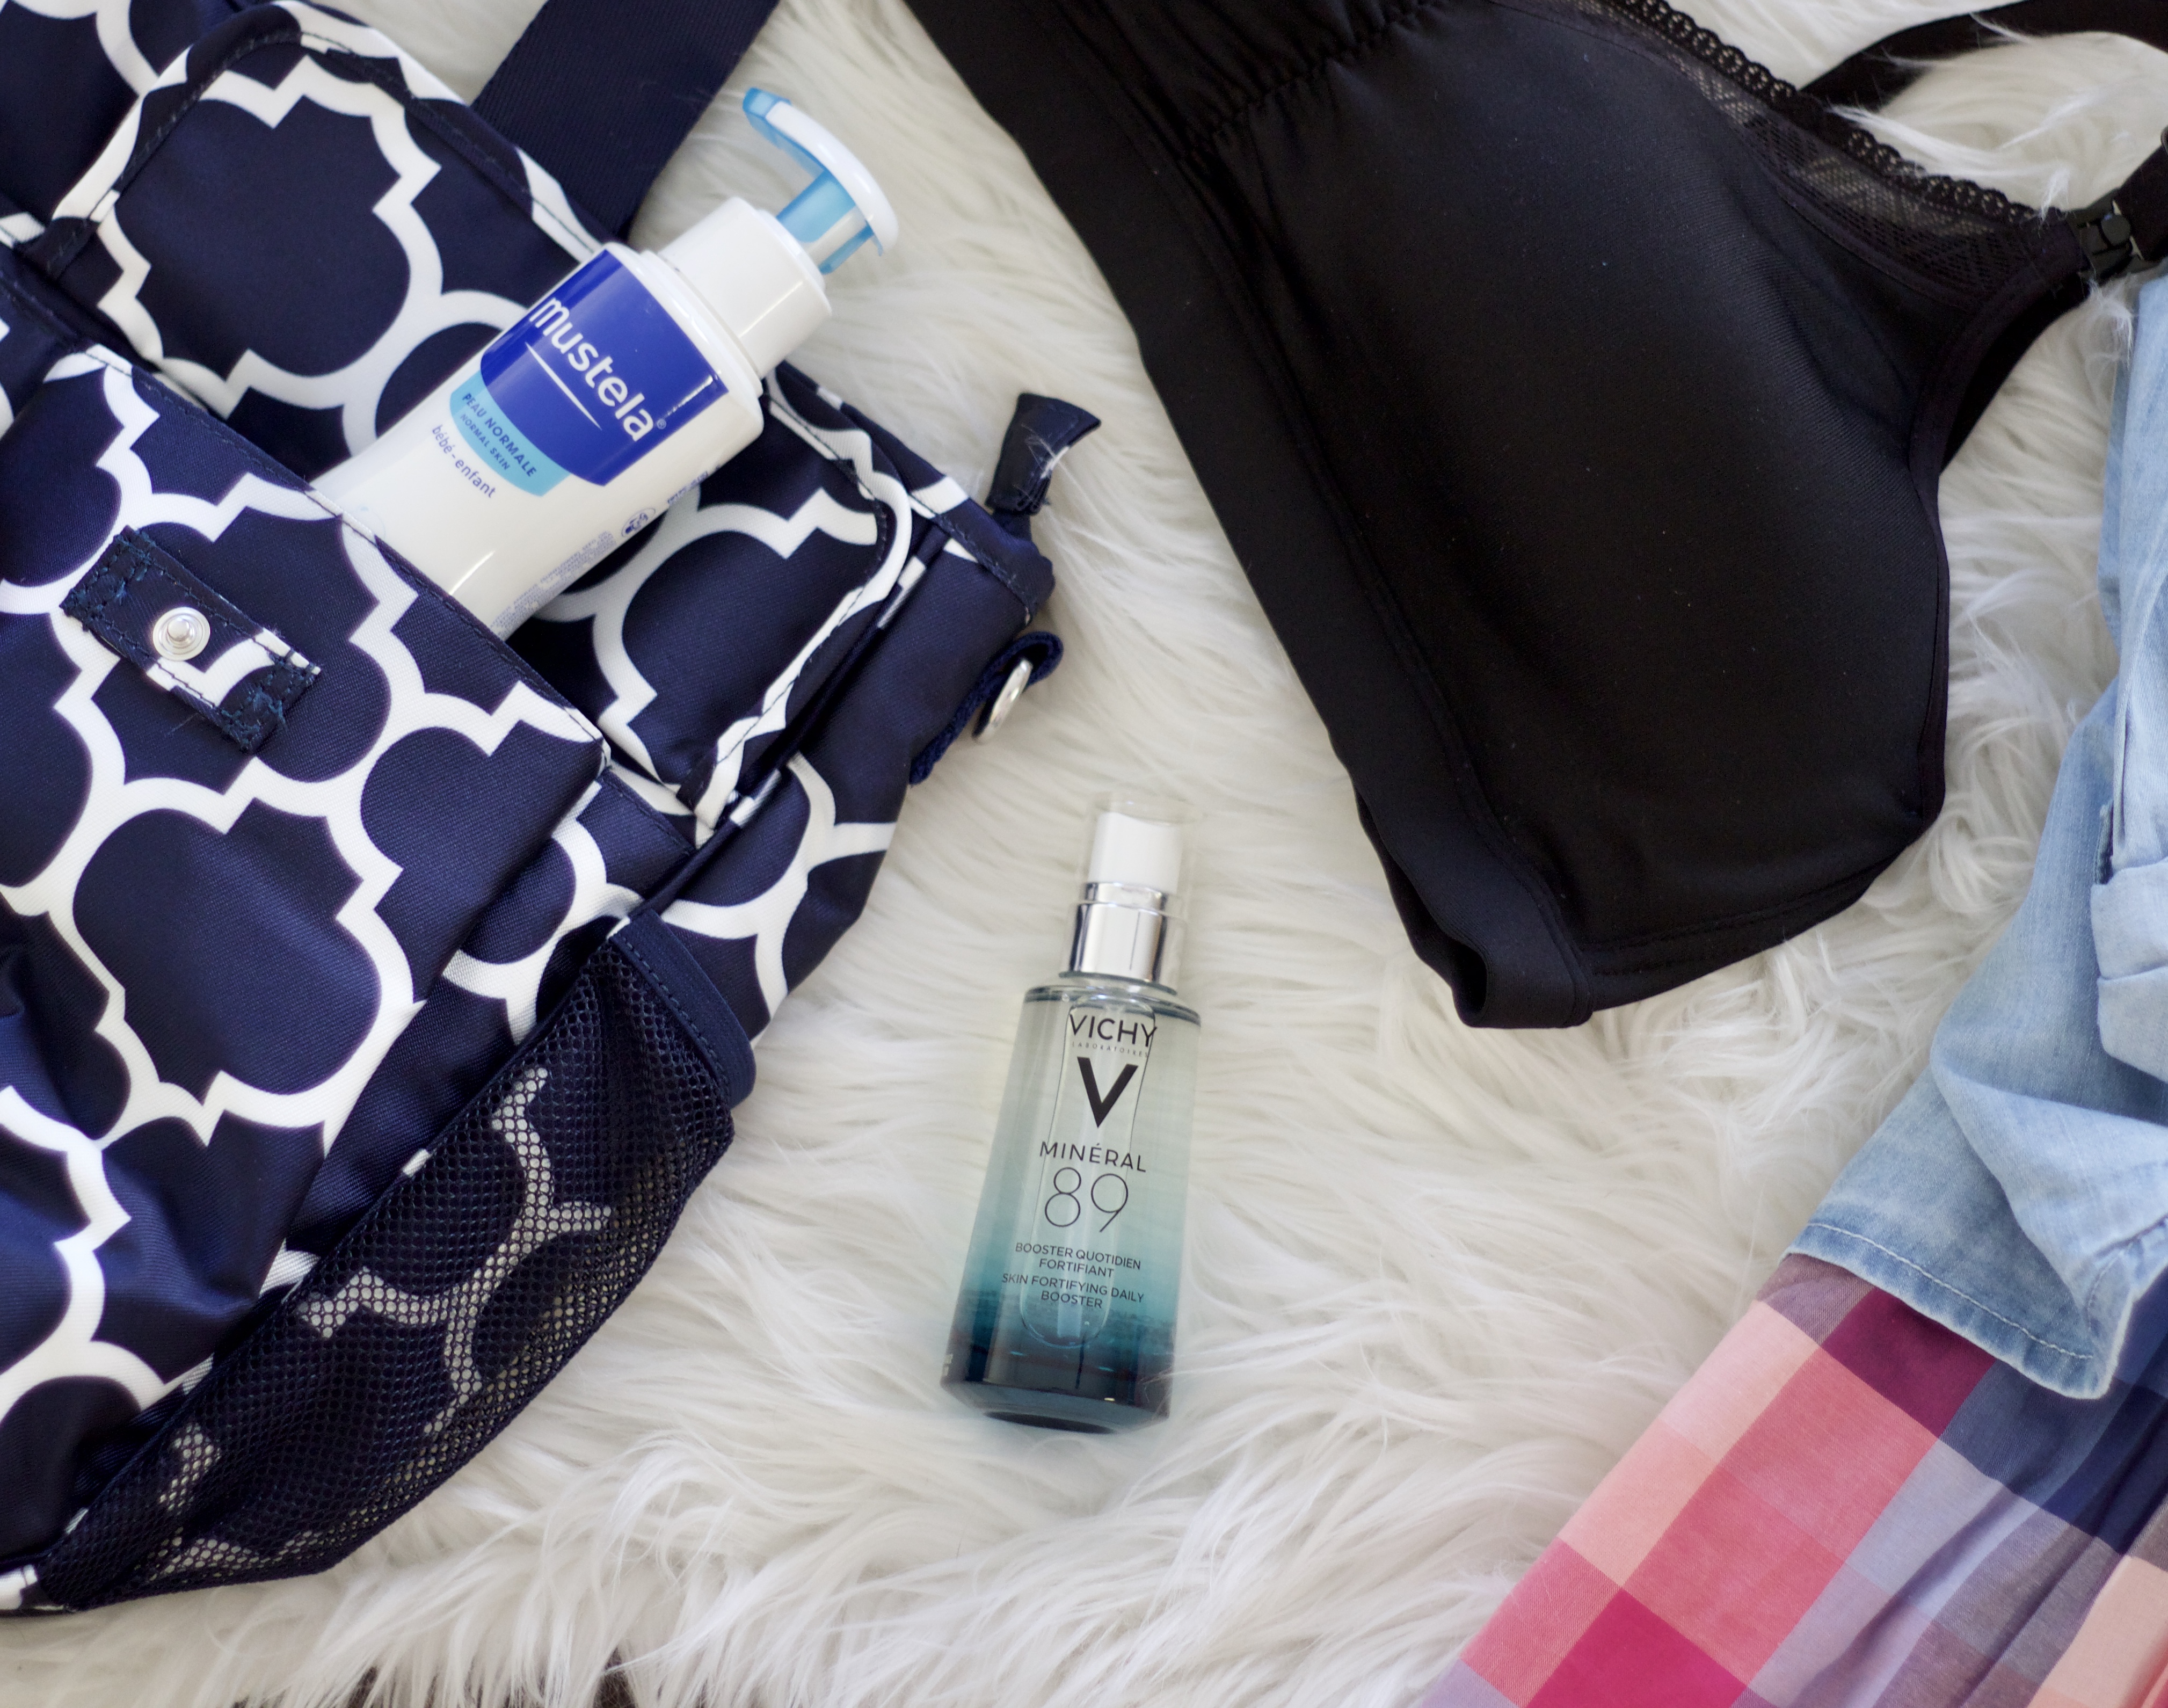 Vichy Mineral 89 review